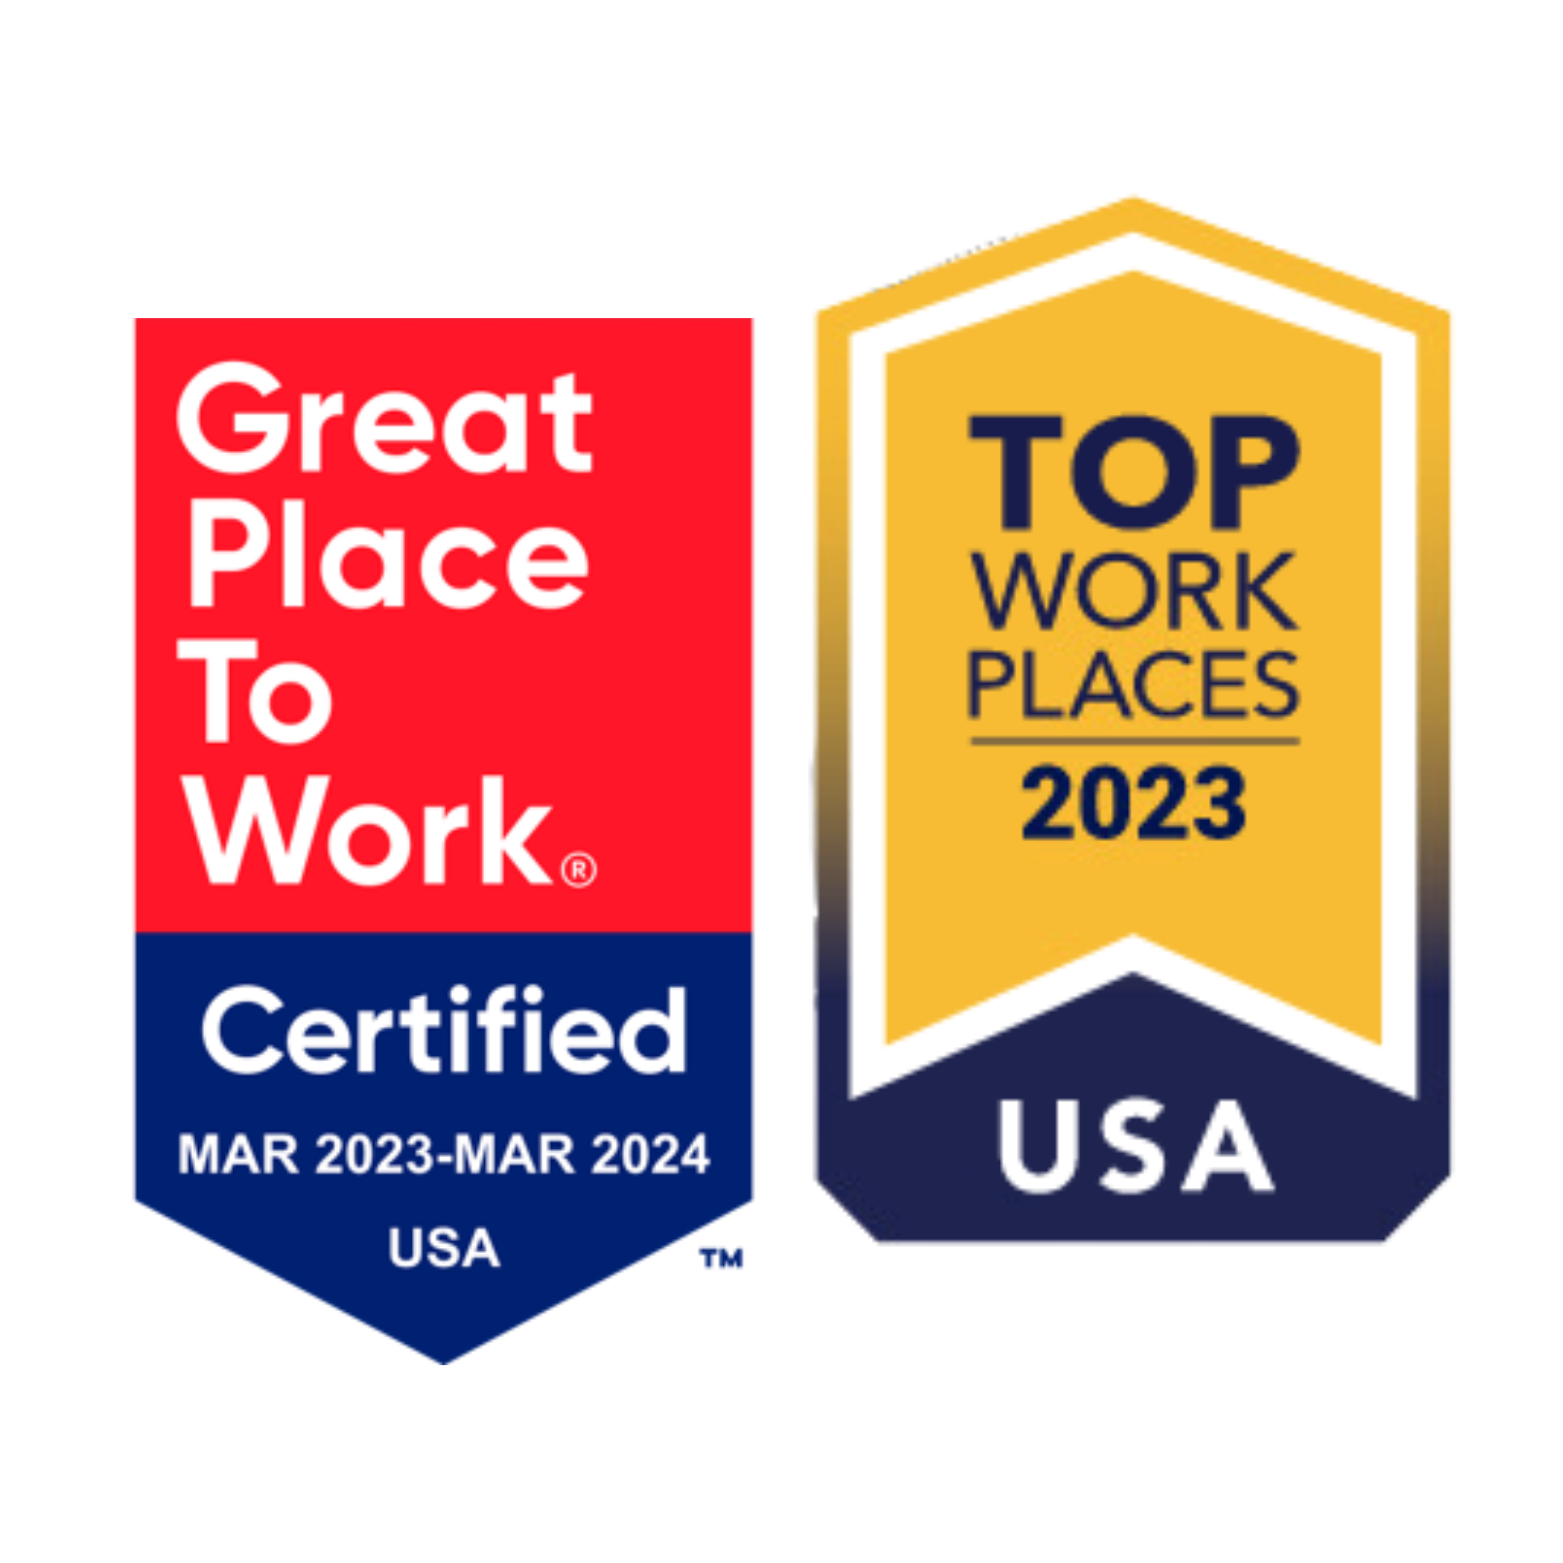 Great Place to Work and Top Places to Work 2023 award badge